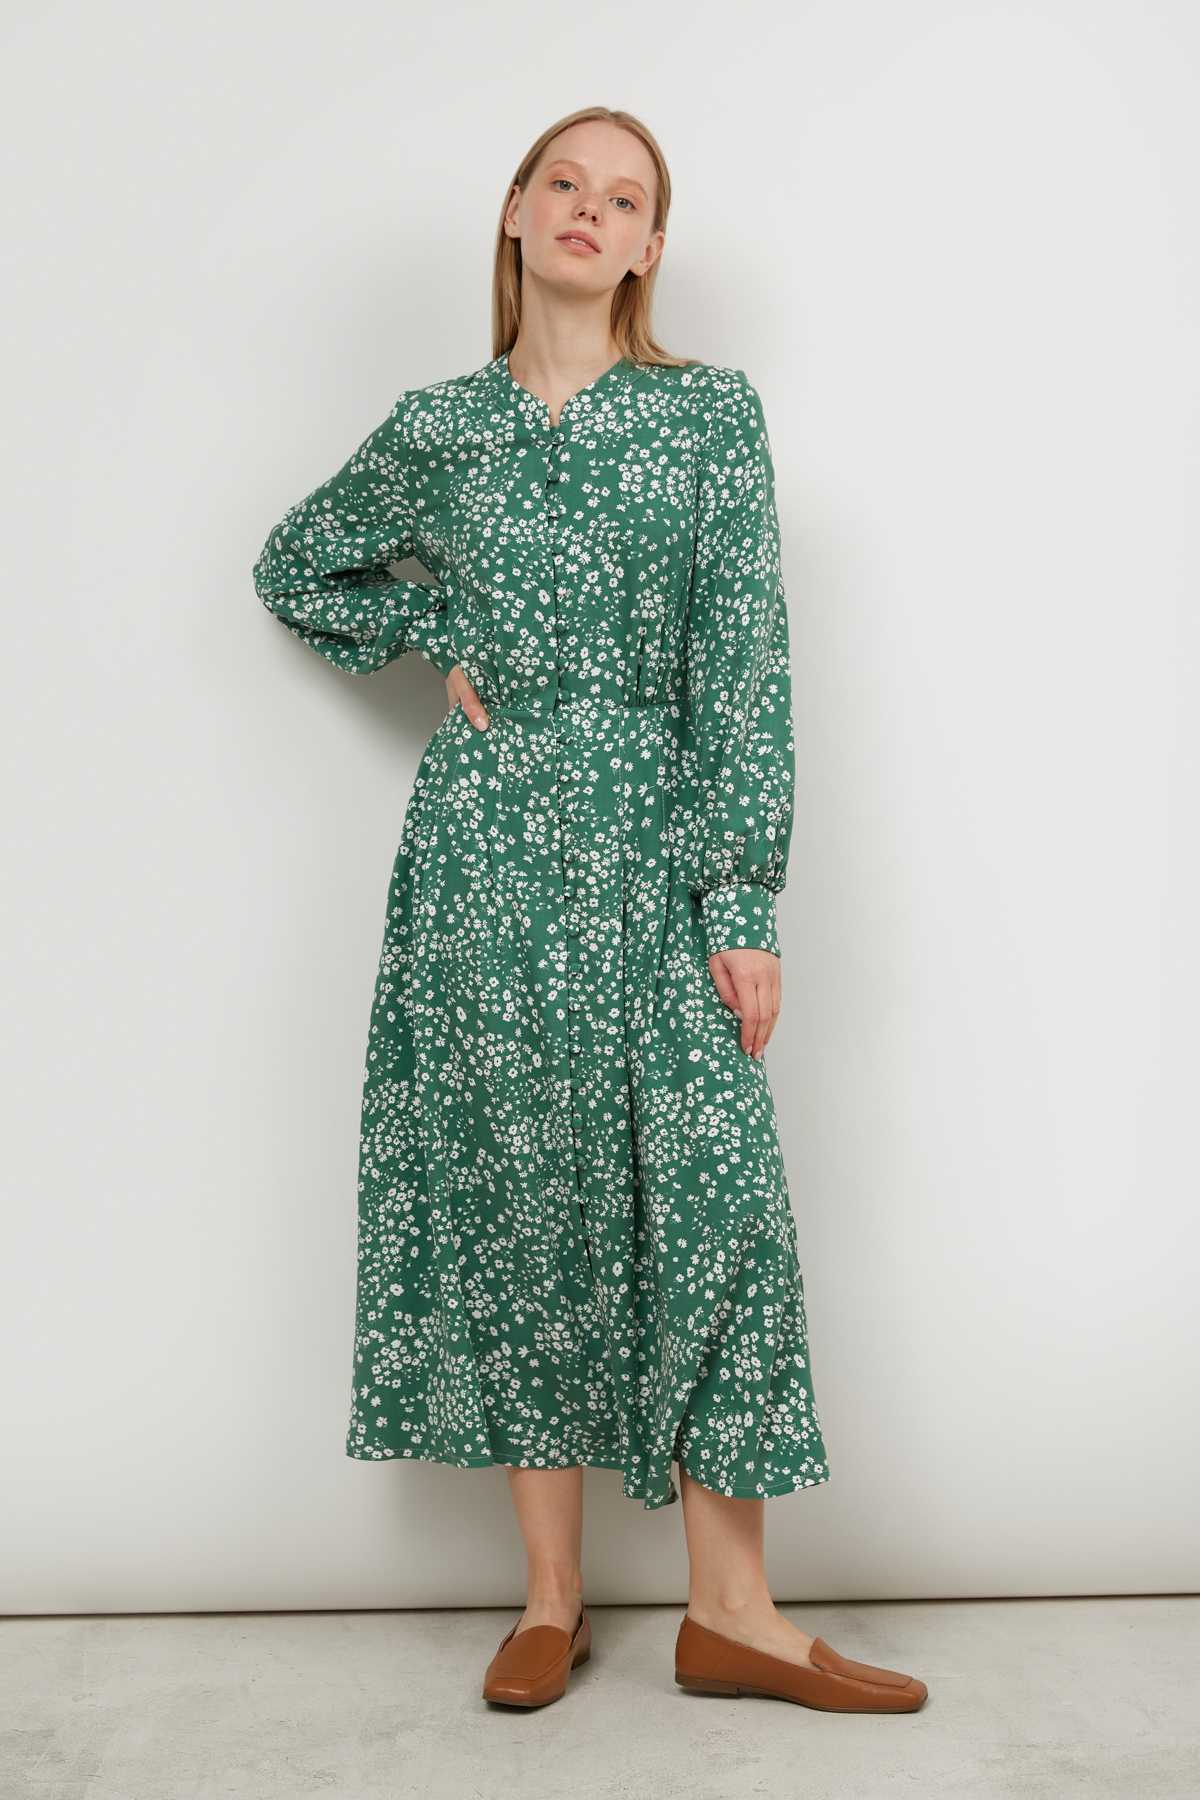 Midi dress with viscose green in flowers print, photo 2